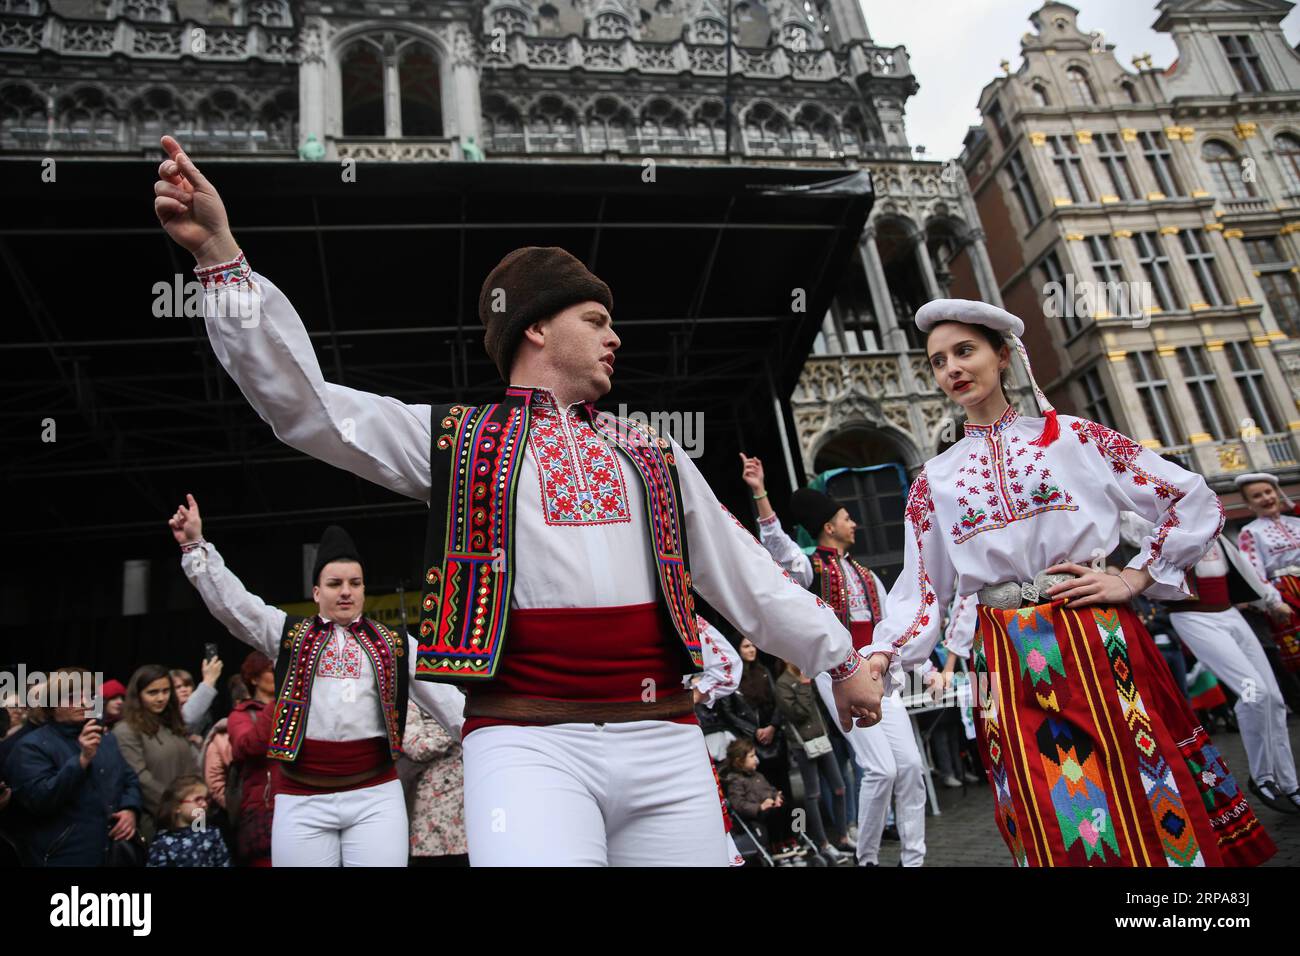 (190428) -- BRUSSELS, April 28, 2019 -- Dancers perform the Bulgarian folk dance on the last day of the 2019 Balkan Trafik at the Grand Place in Brussels, Belgium, April 28, 2019. The festival aims to share the artistic and festive cultures of the Balkans in south-eastern Europe. ) BELGIUM-BRUSSELS-BALKAN TRAFIK ZhengxHuansong PUBLICATIONxNOTxINxCHN Stock Photo